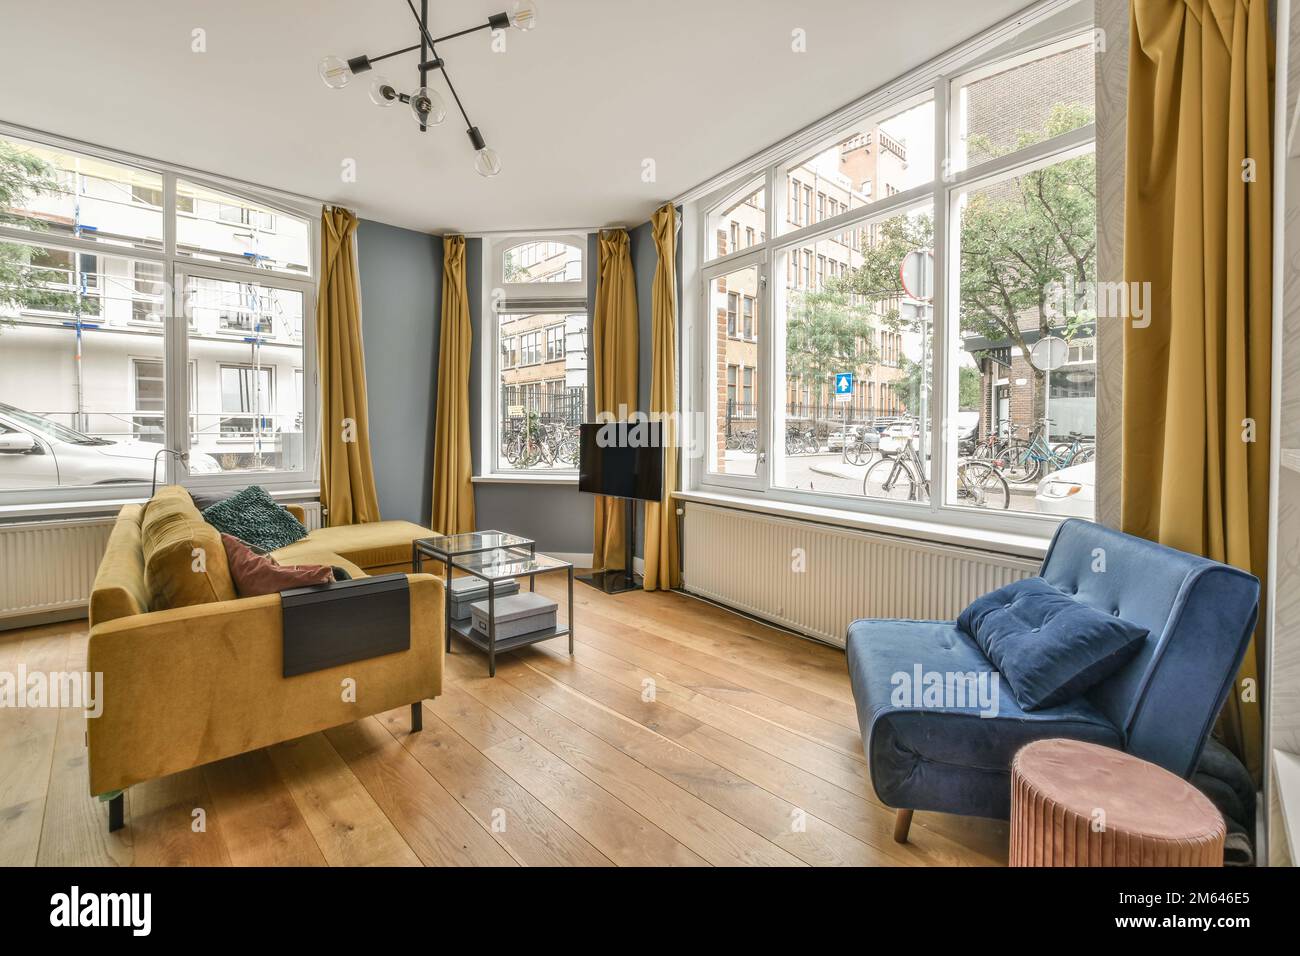 a living room with wood flooring and yellow drapes on the windows looking out onto an urban street view Stock Photo